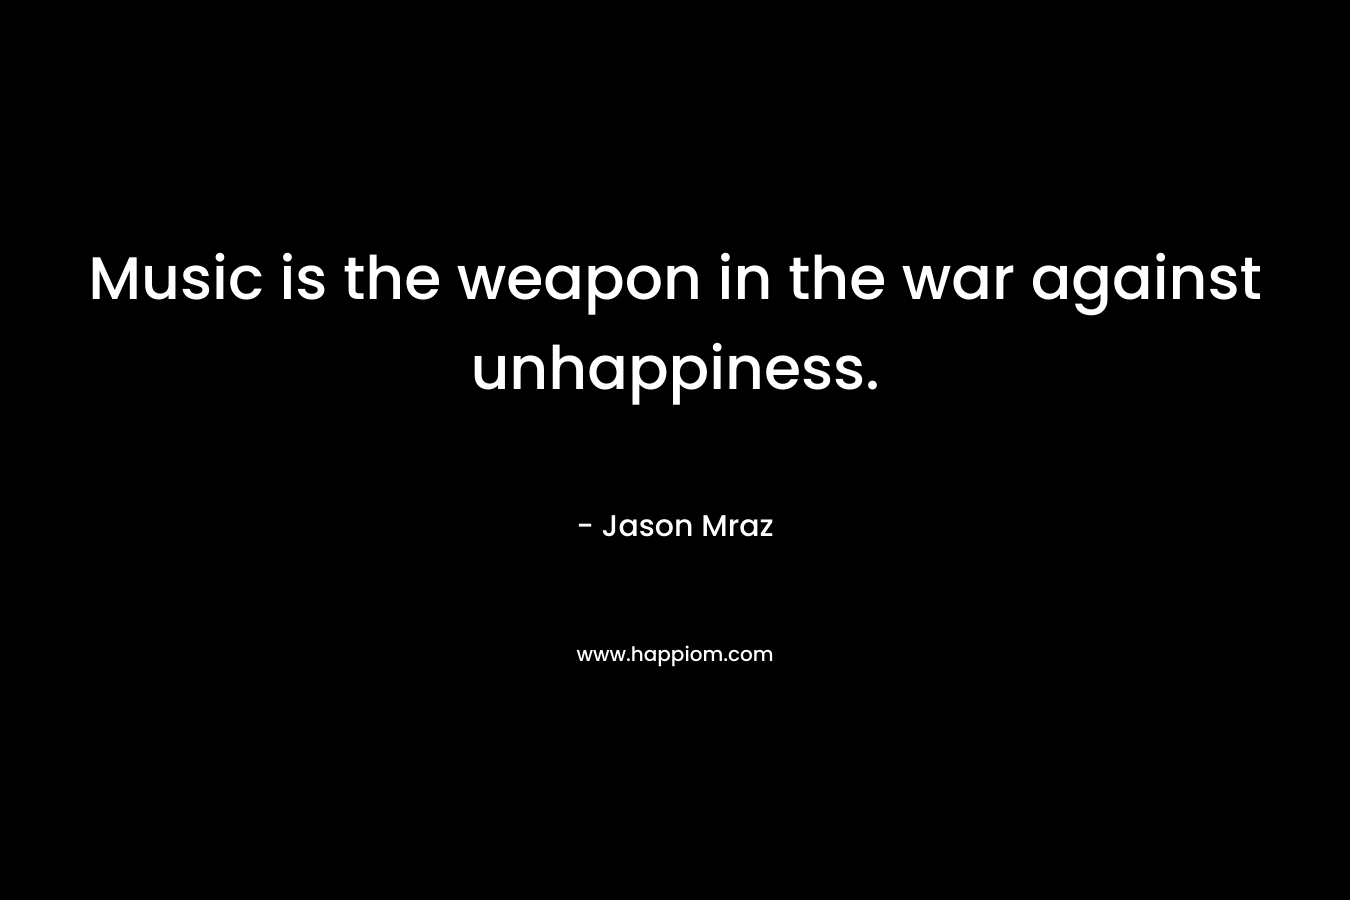 Music is the weapon in the war against unhappiness. – Jason Mraz